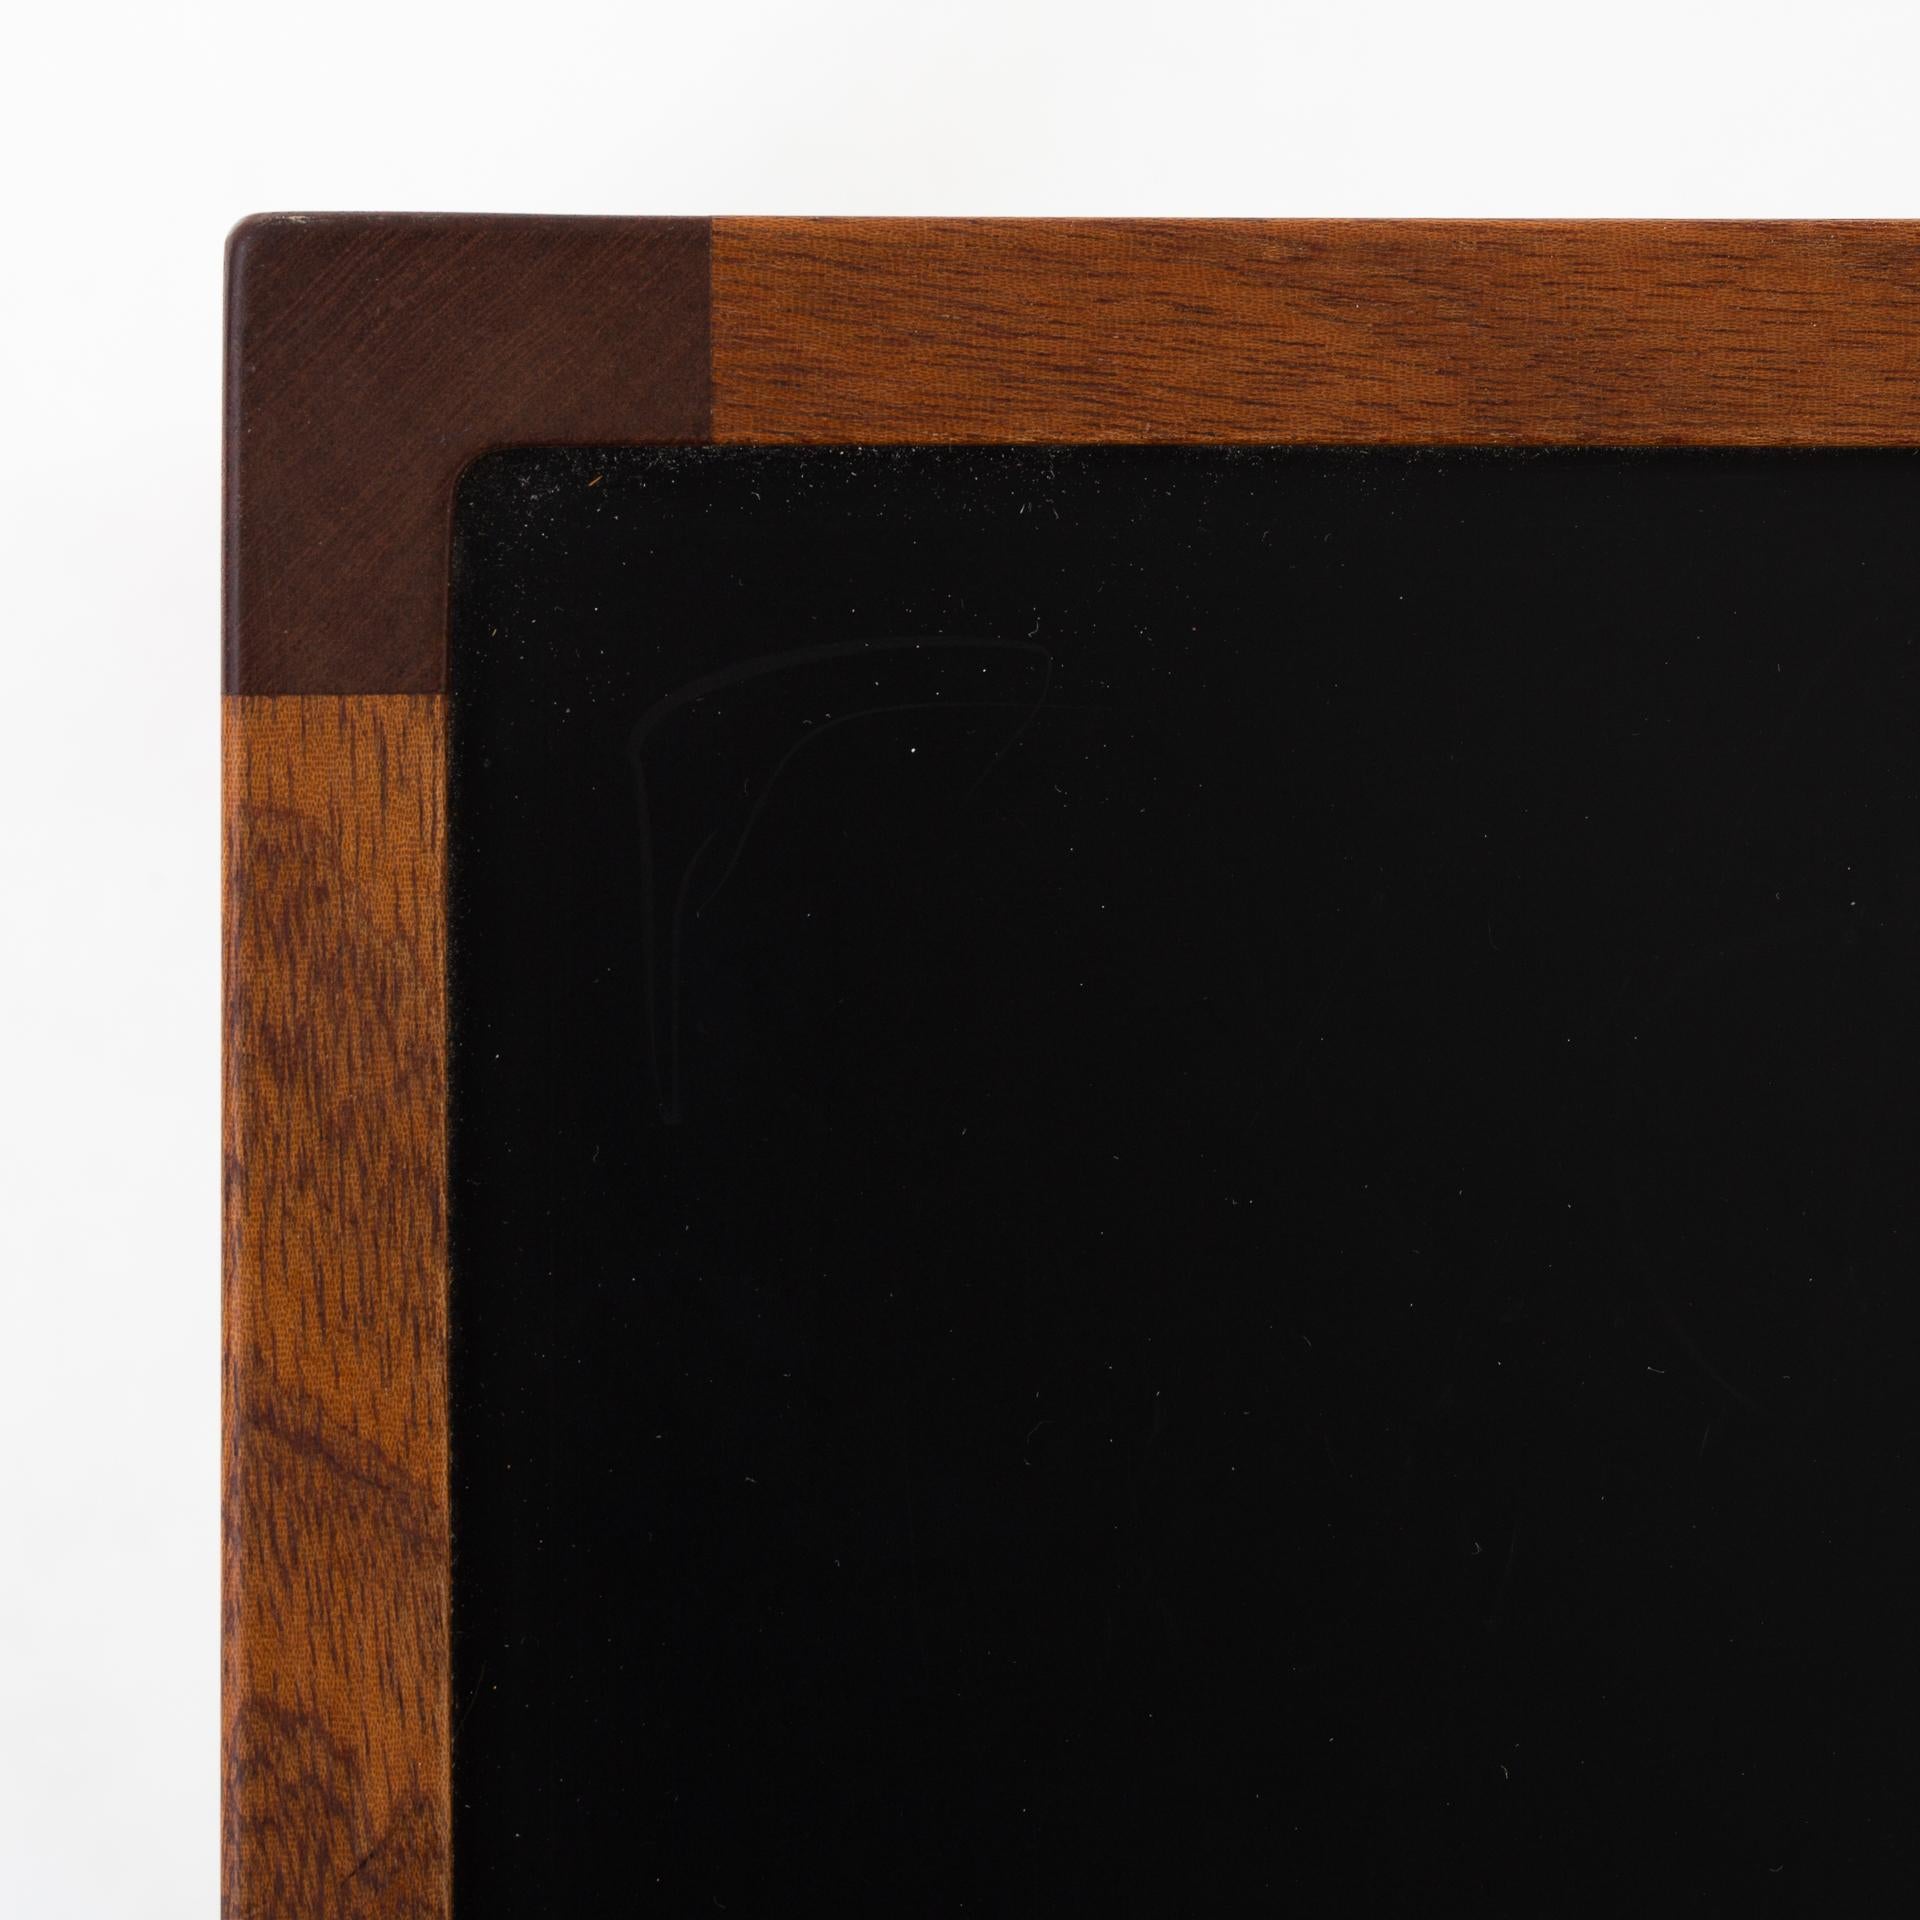 Nesting tables in mahogany and black Formica. Maker Rud. Rasmussen.